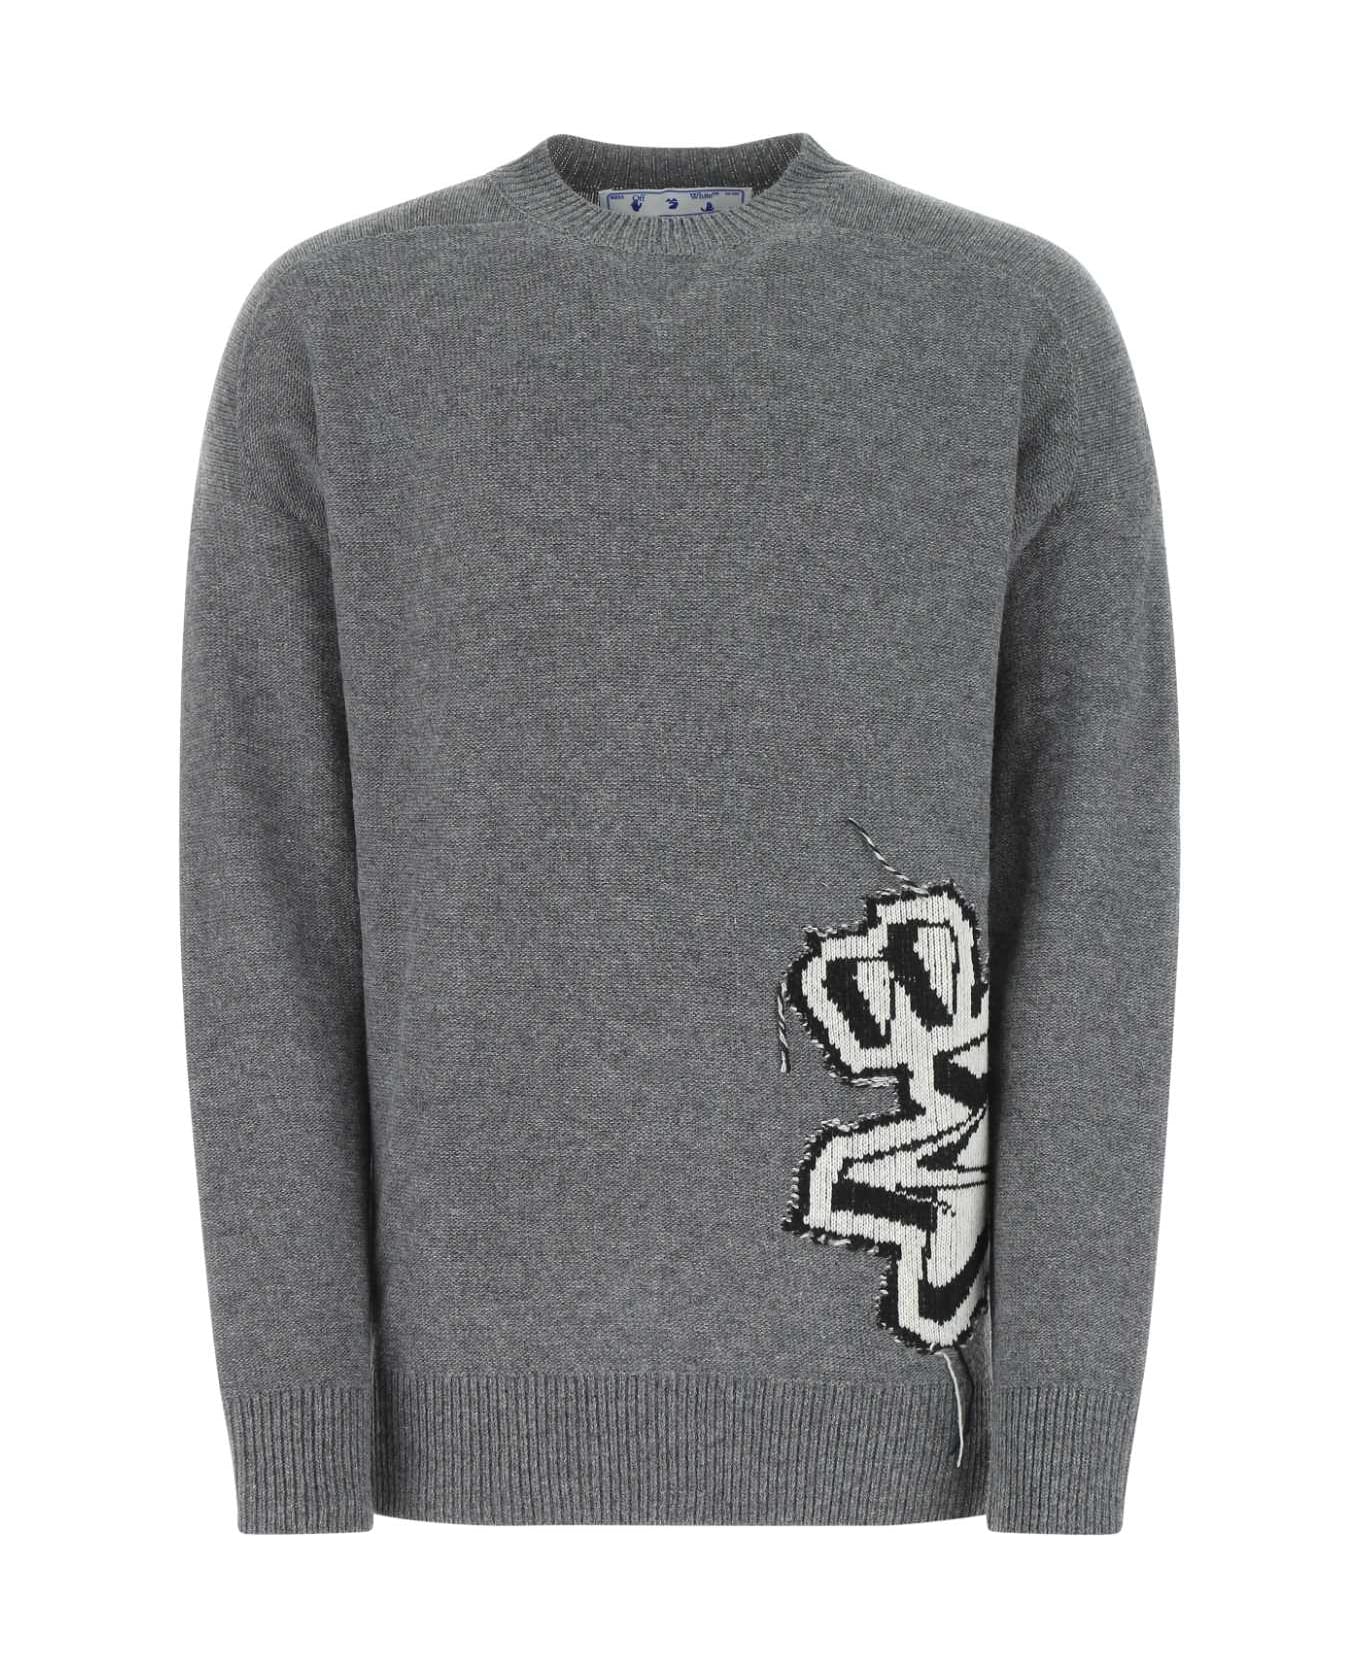 Off-White Grey Wool Oversize Sweater - 0610